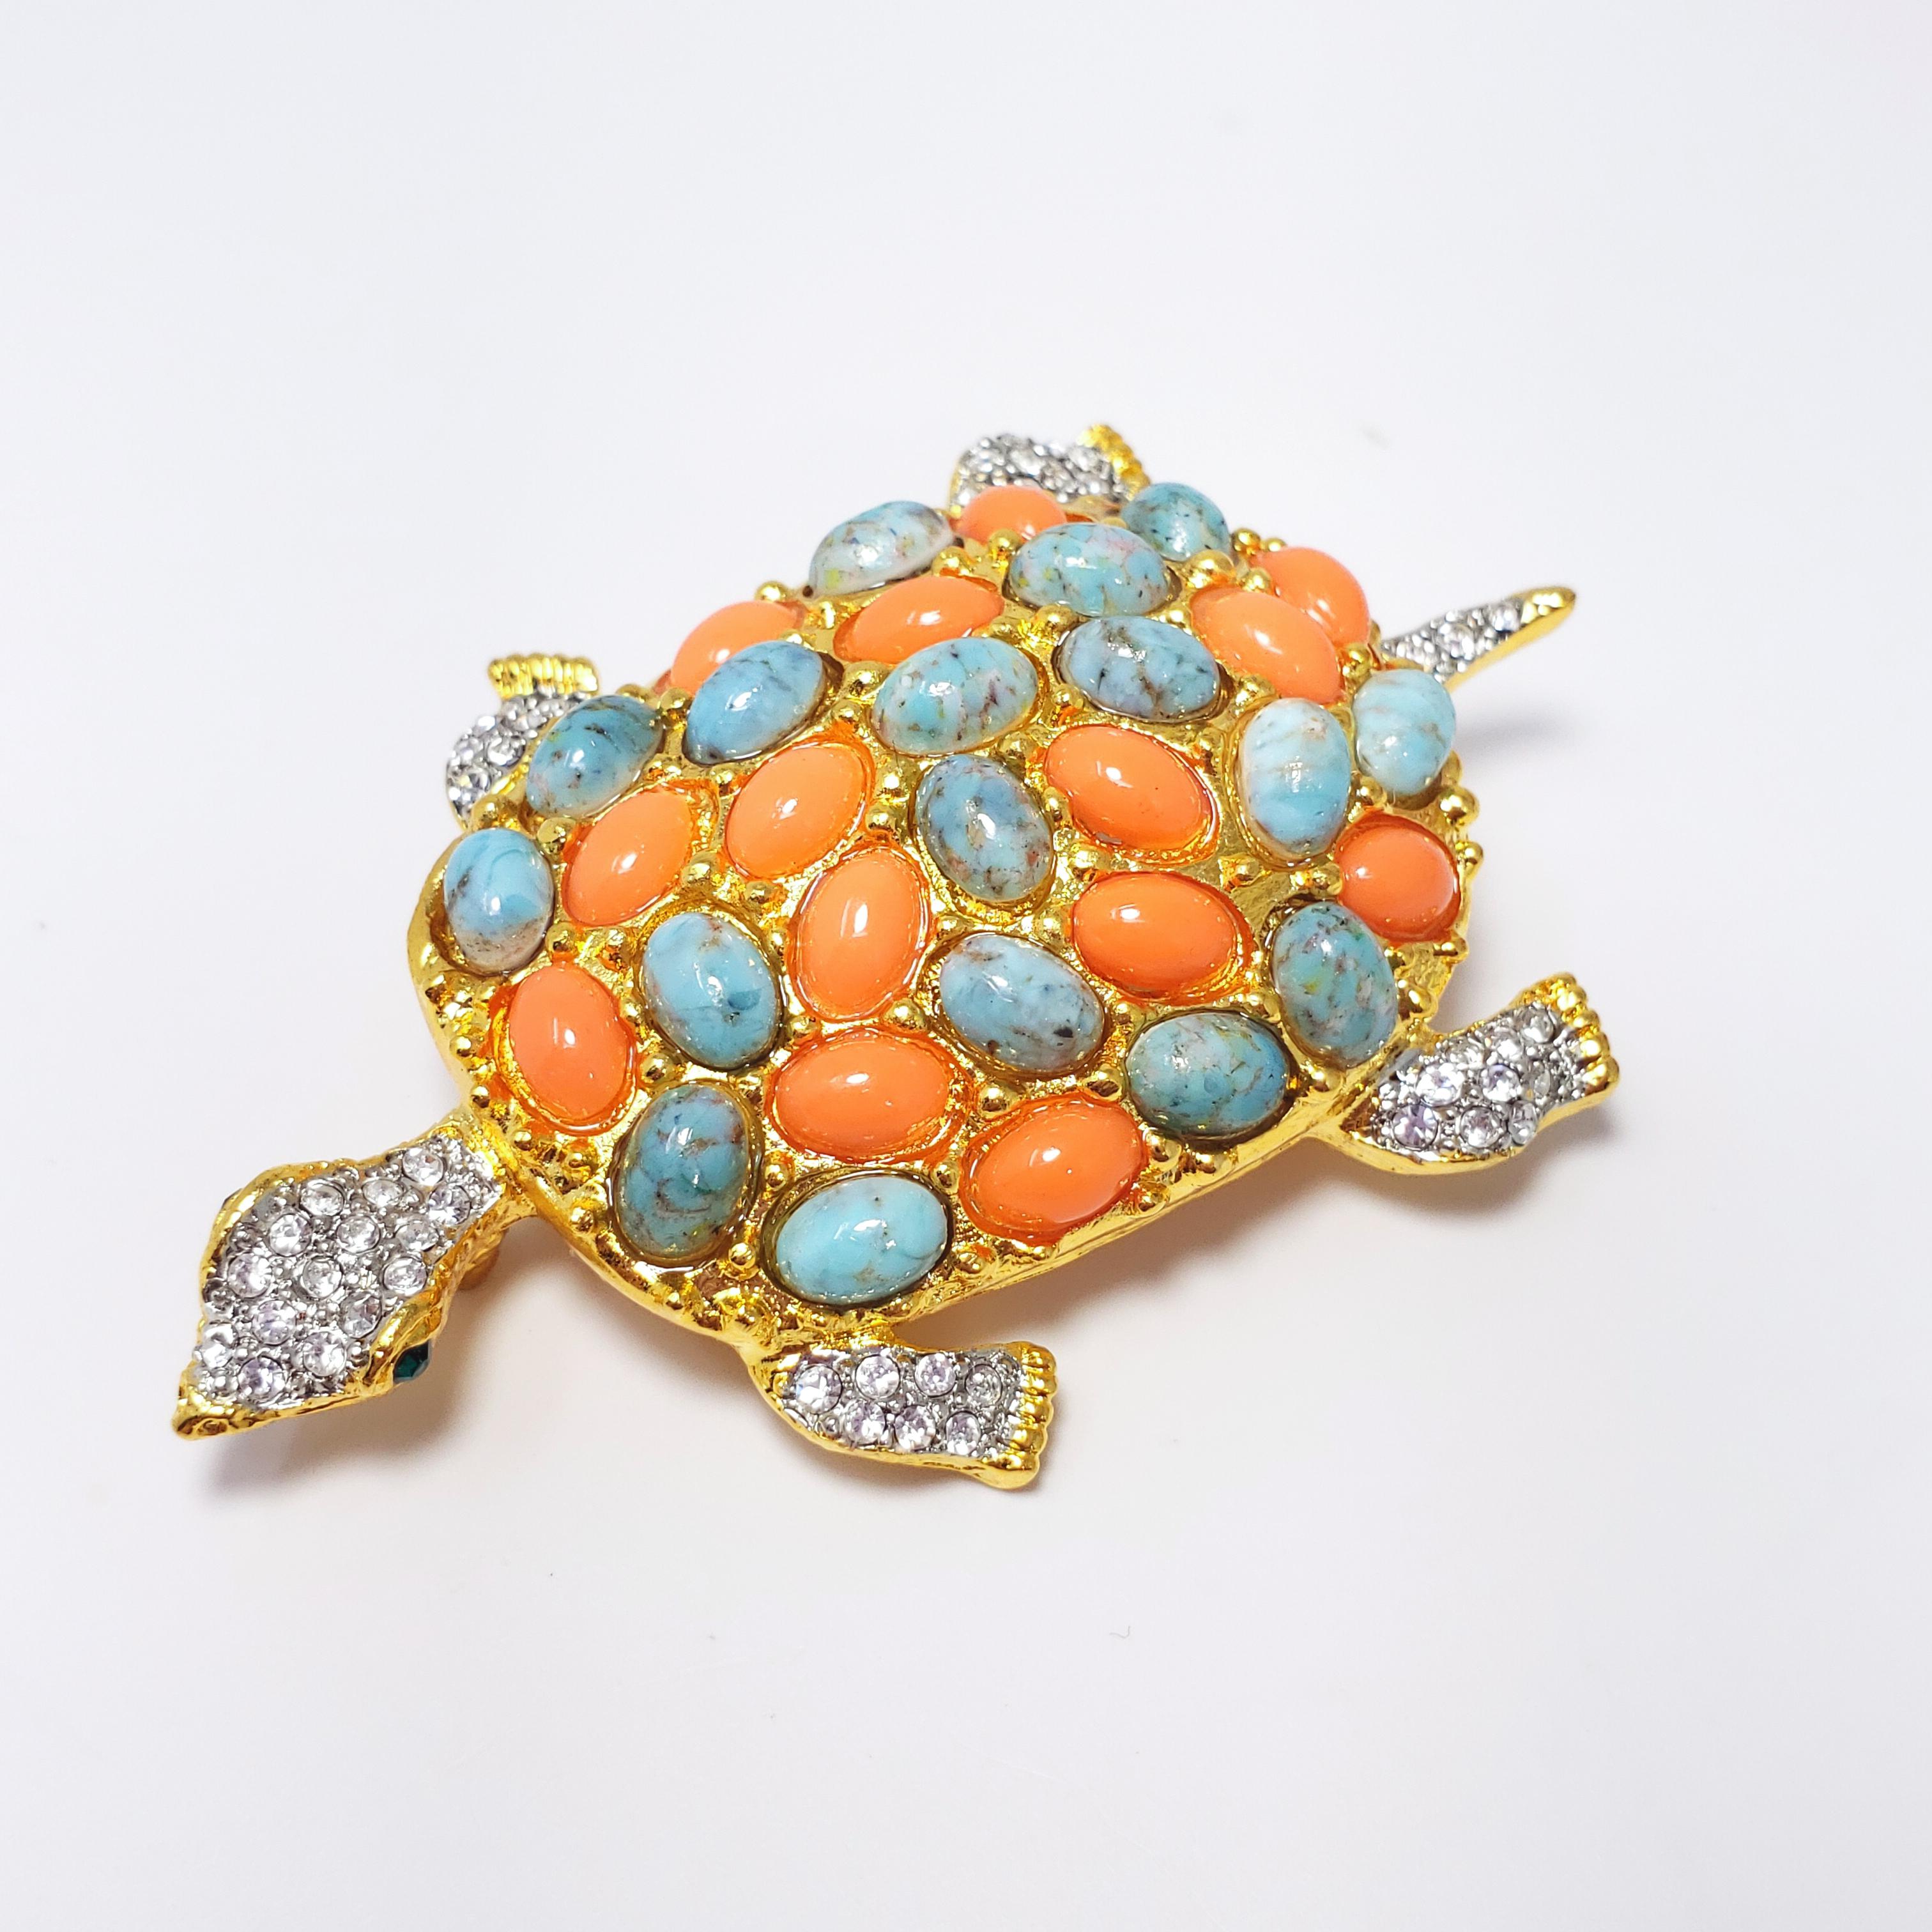 A whimsical turtle decorated with pave resin cabochons in coral and turquoise colors, as well as clear crystals. Set in gold plated metal. By Kenneth Jay Lane.

Hallmarks: Kenneth © Lane